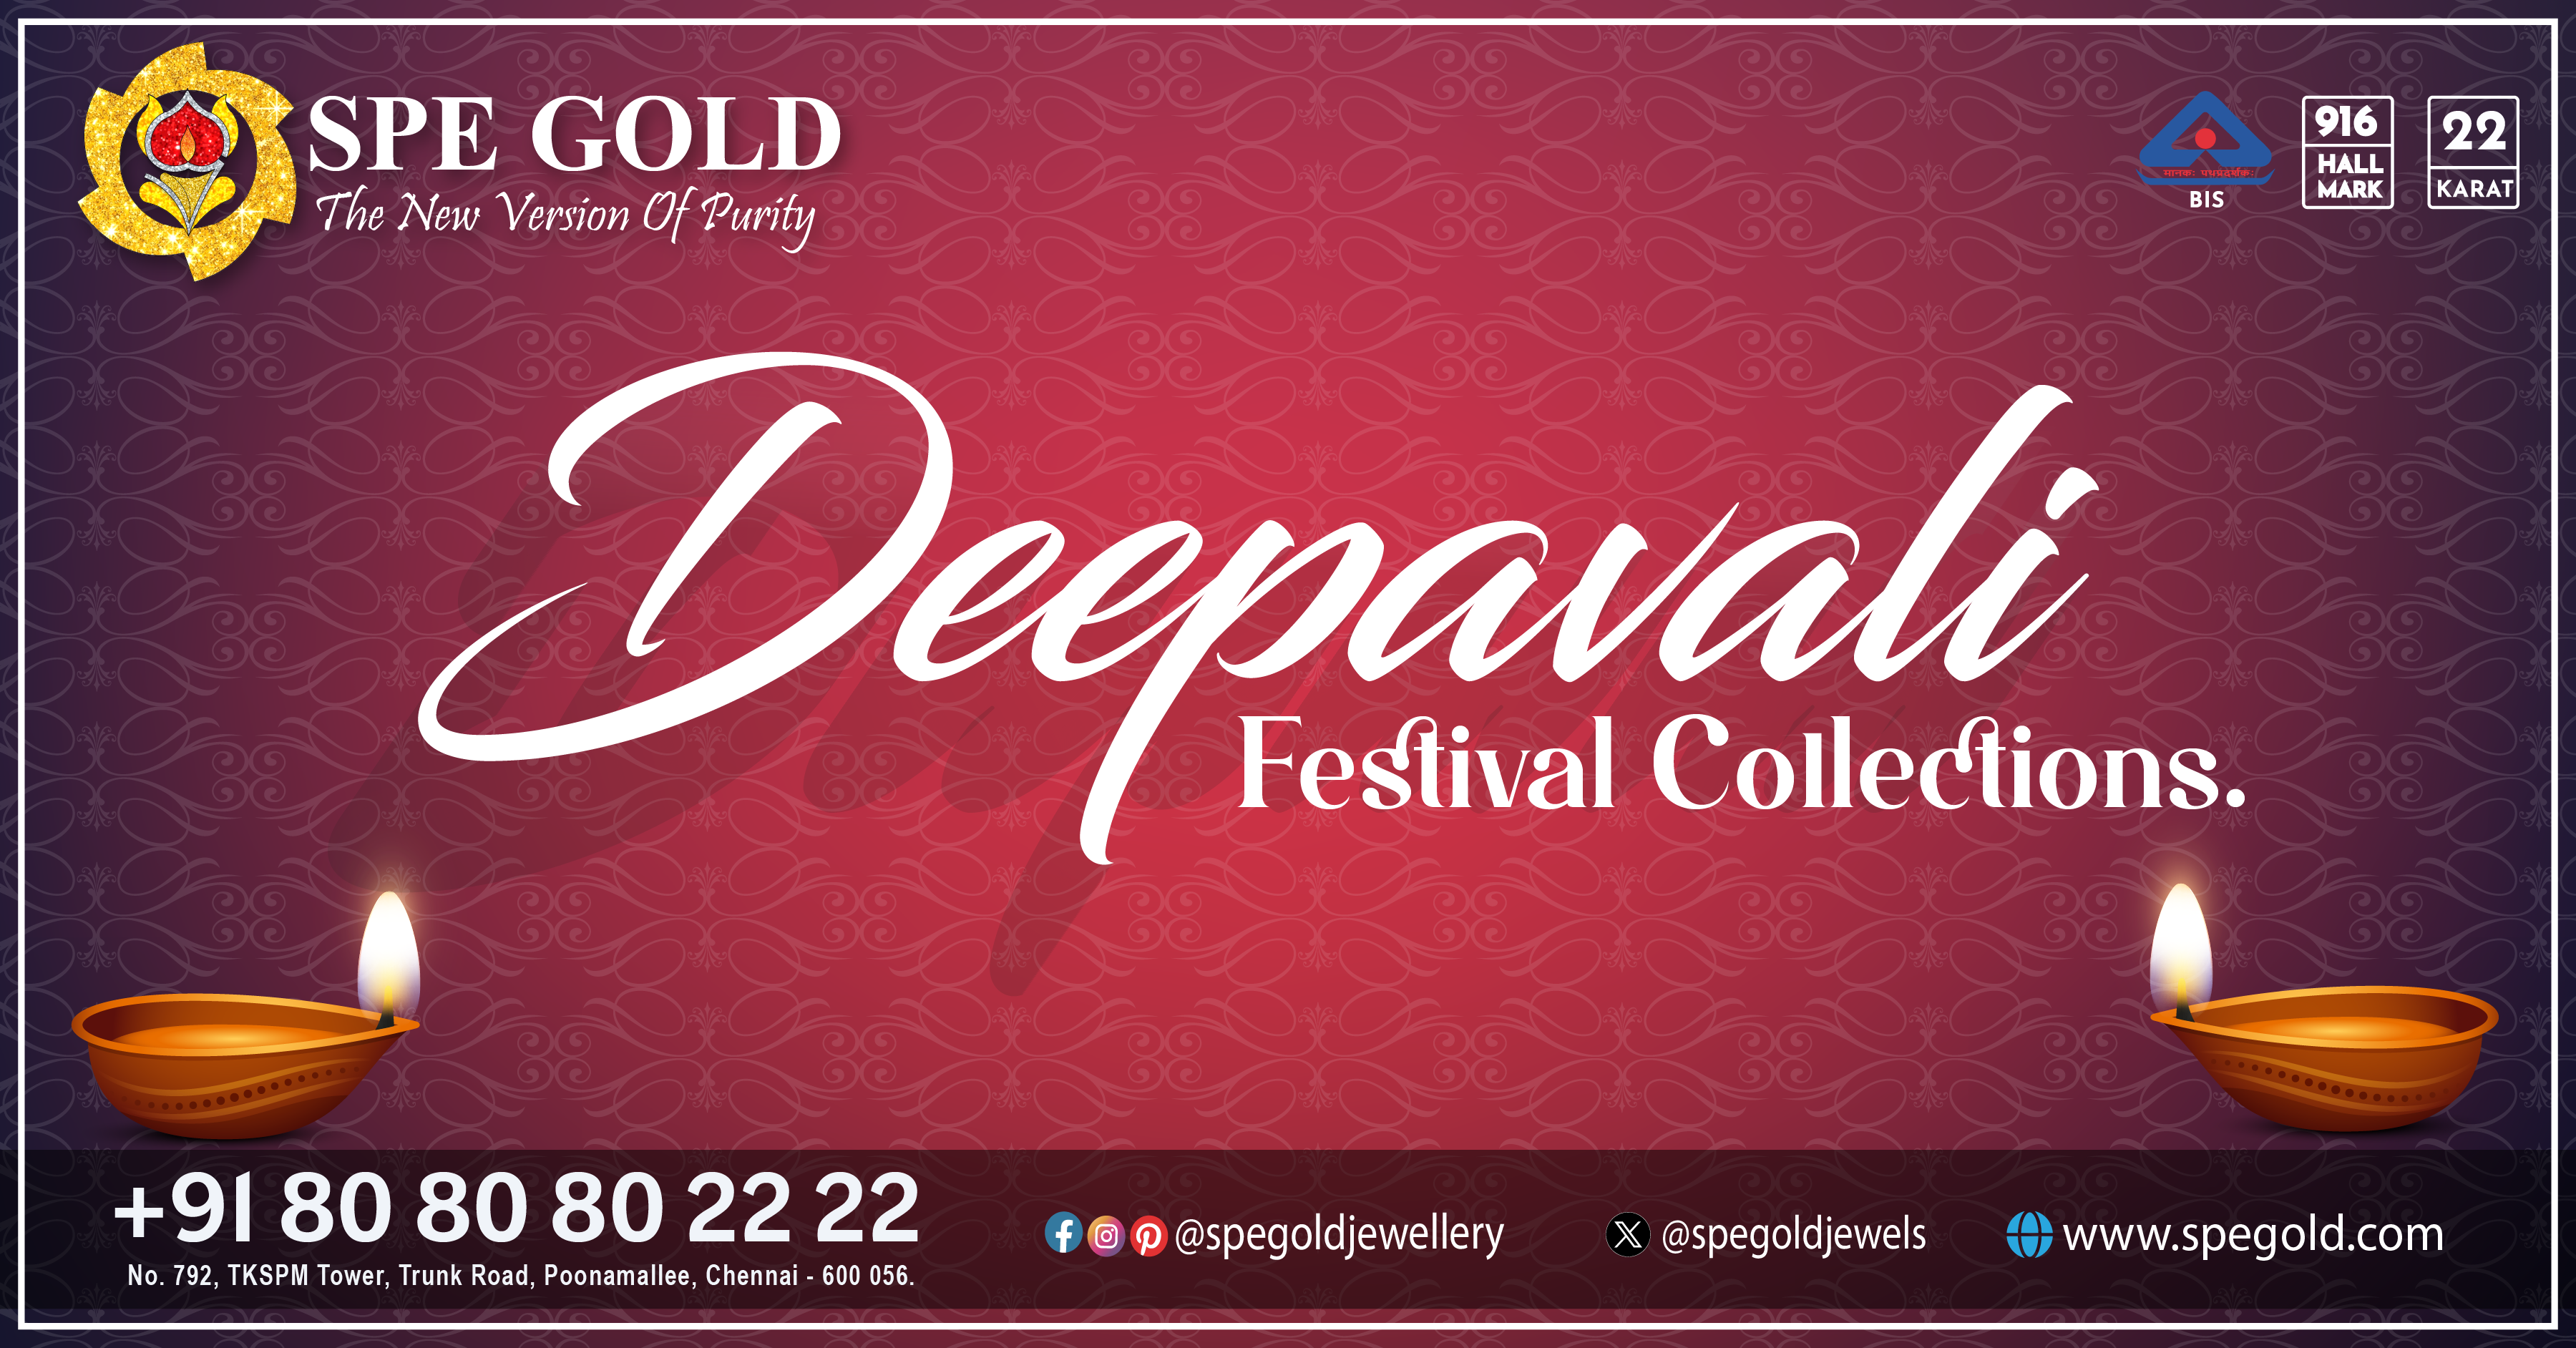 Deepavali with Spectacular SPE GOLD Collections!